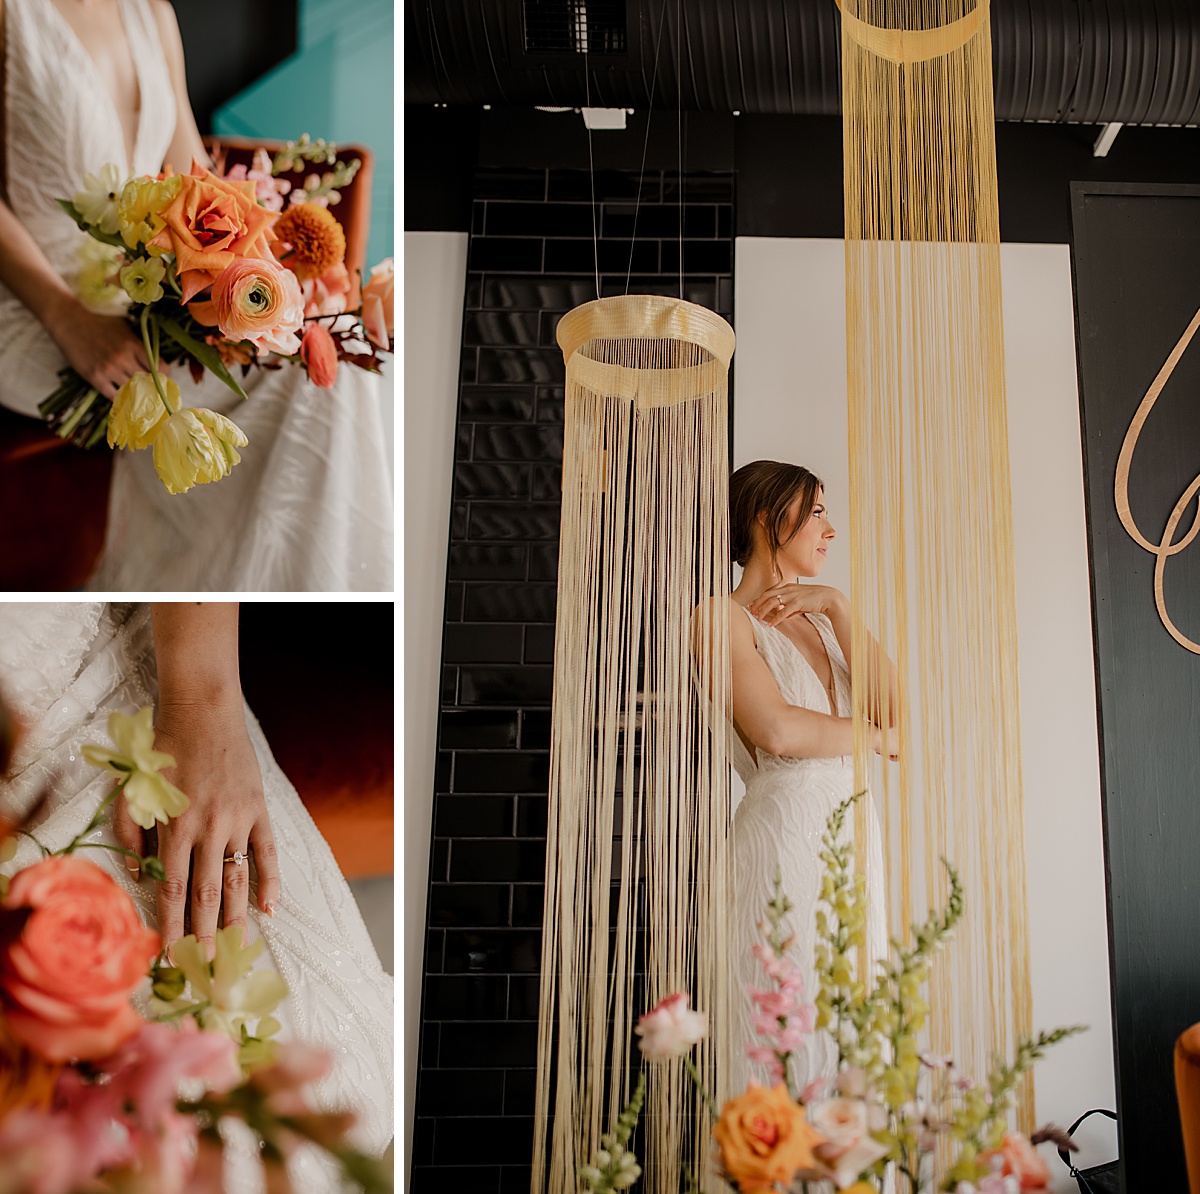 Colorful wedding bouquet and custom fringe decor with an orange, peach, and yellow color palette.